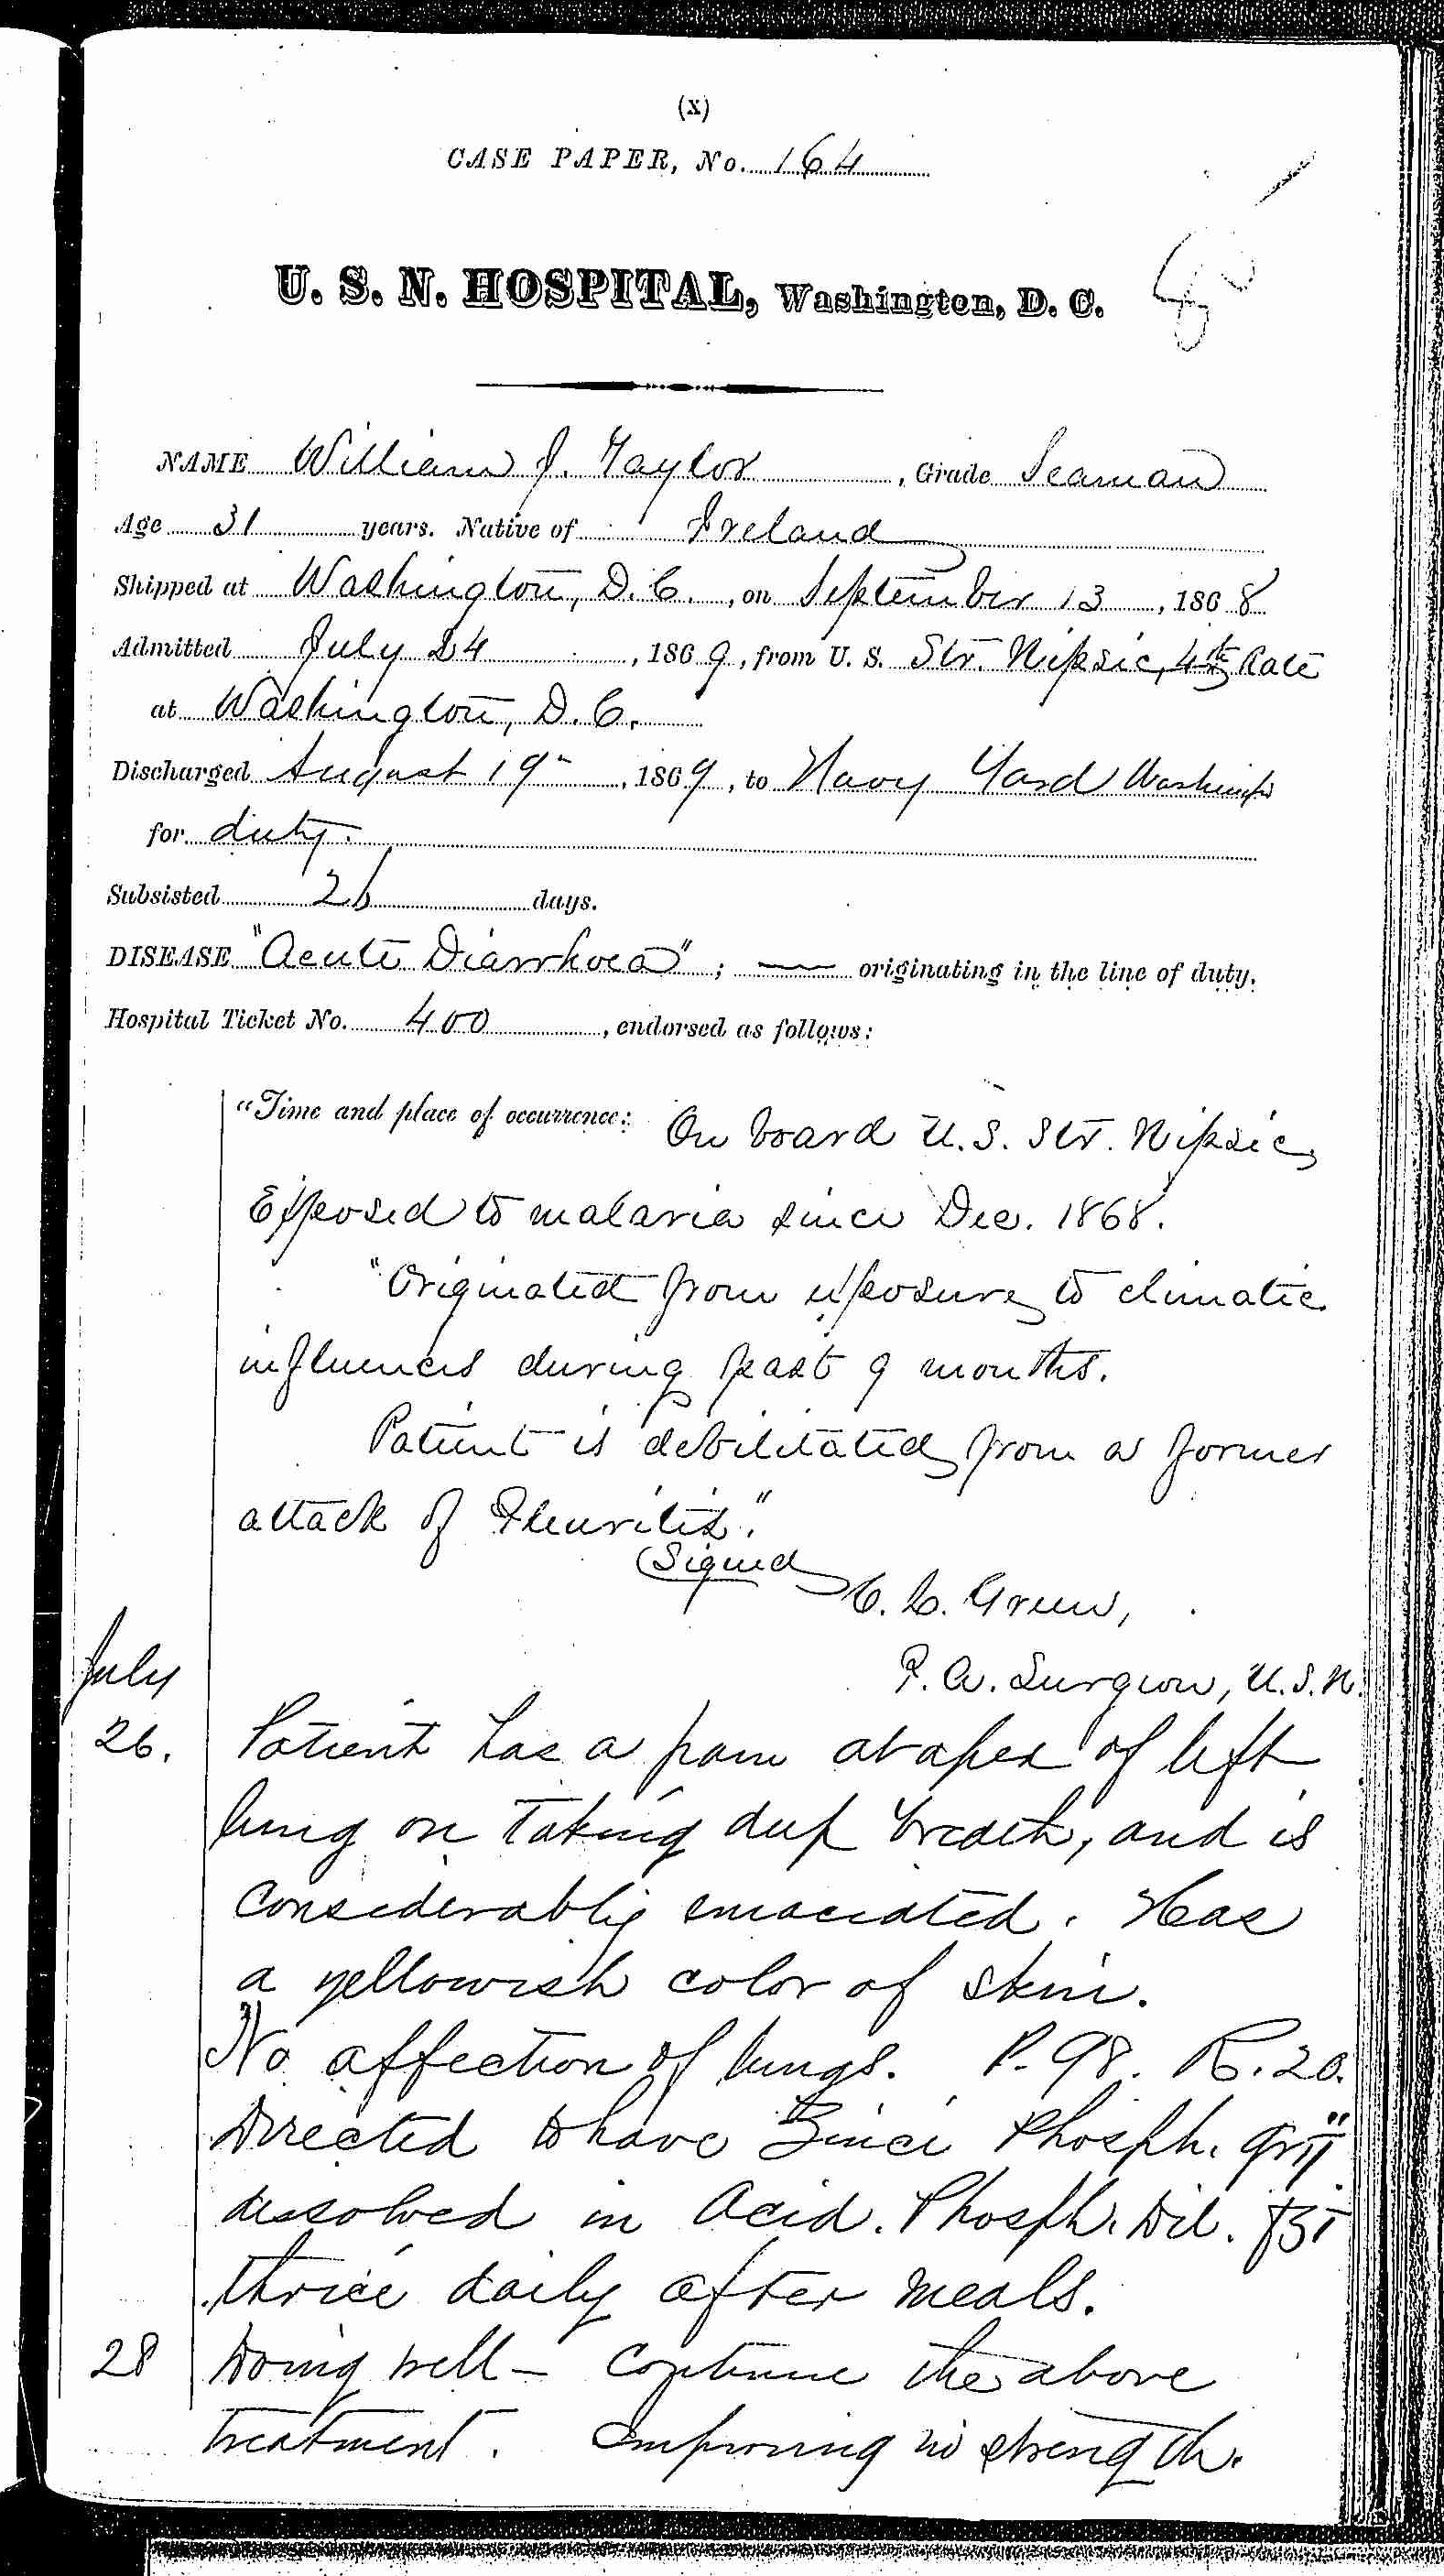 Entry for William J. Taylor (page 1 of 2) in the log Hospital Tickets and Case Papers - Naval Hospital - Washington, D.C. - 1868-69